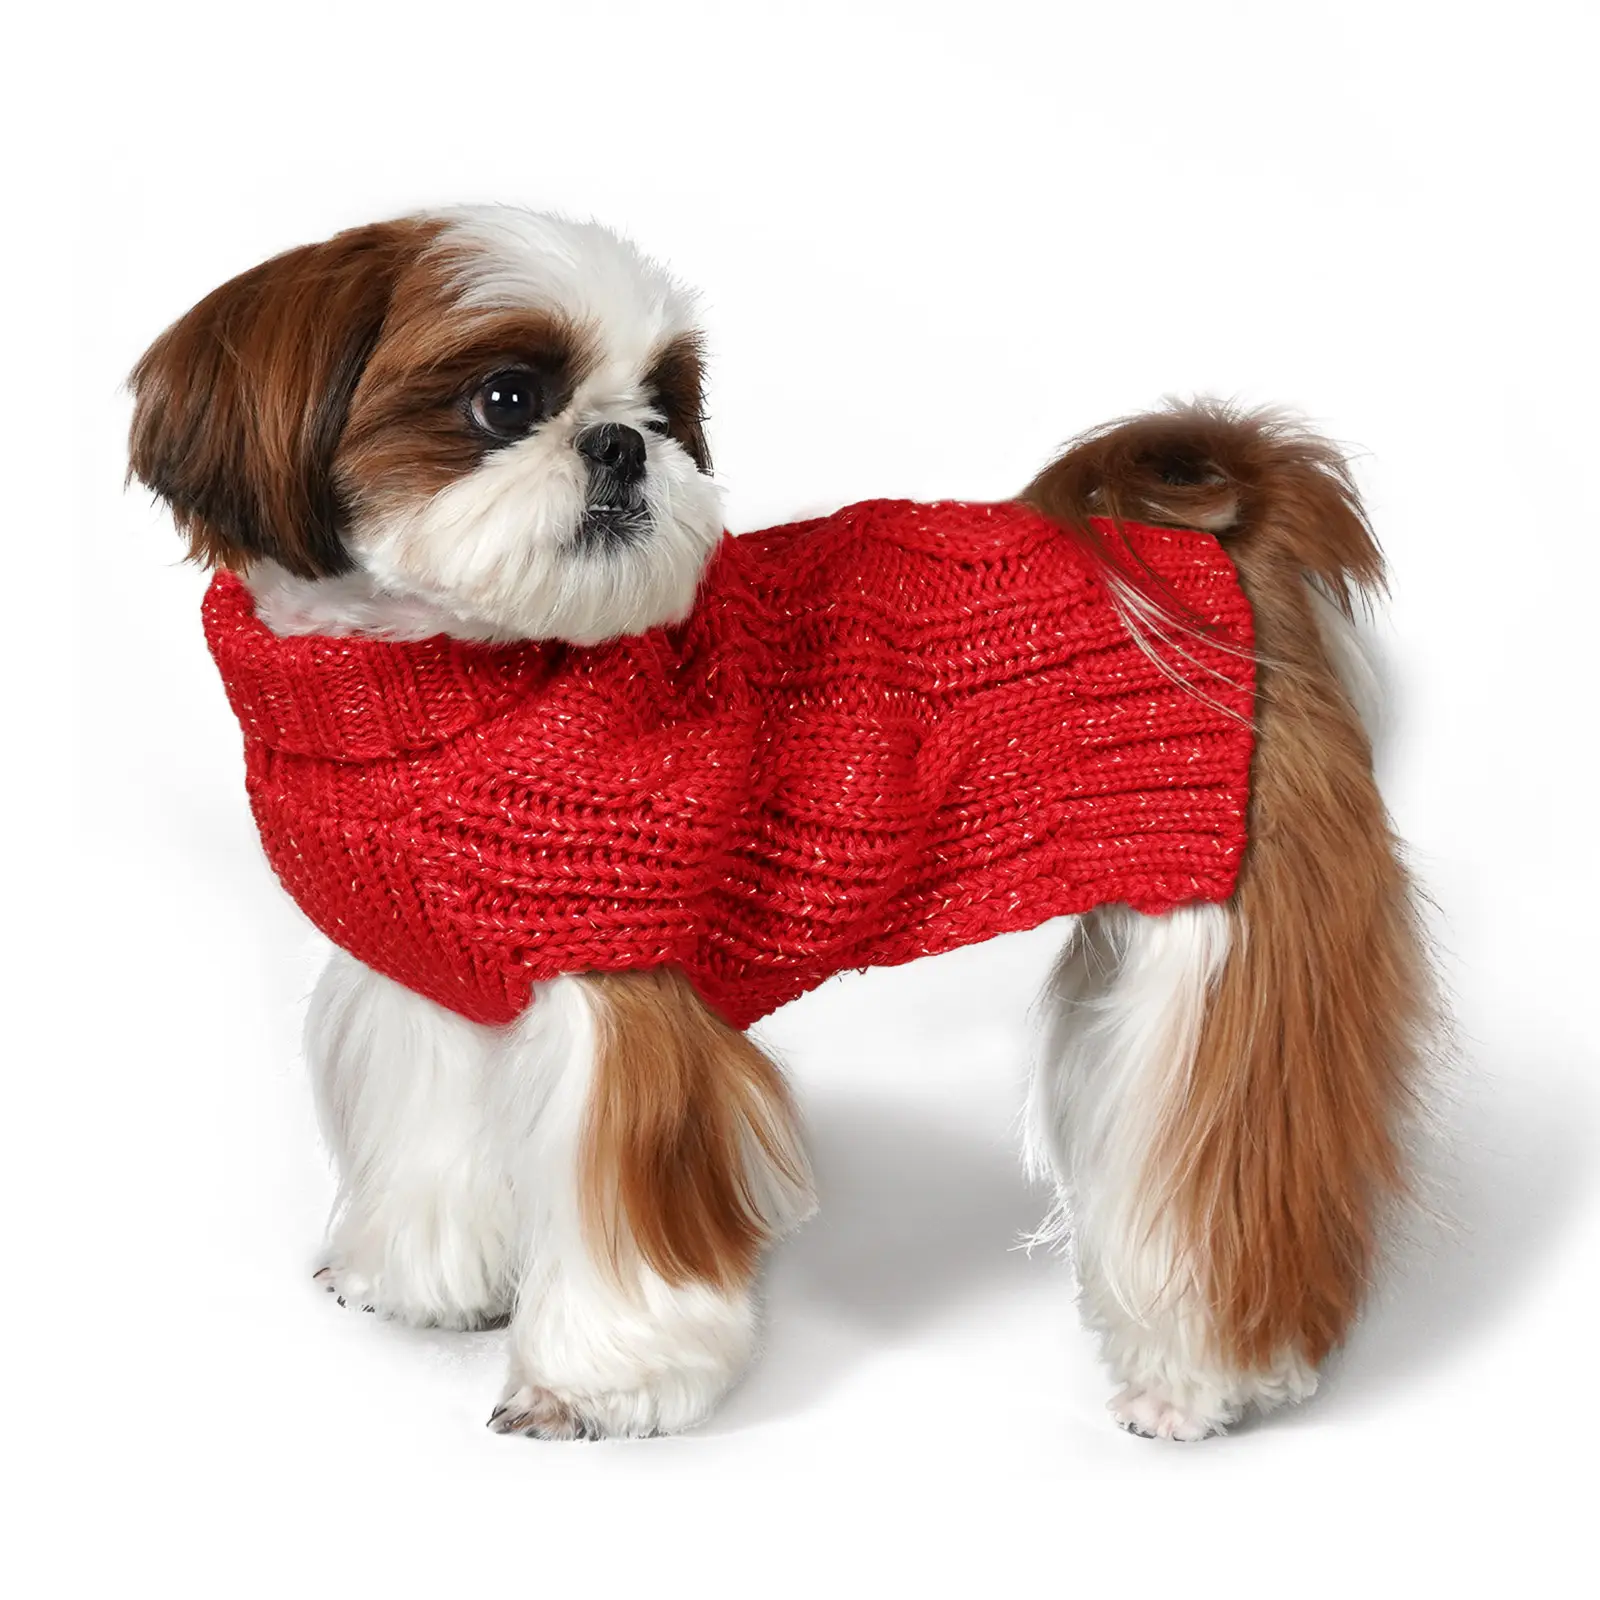 Dog Sweater Wholesale Best Selling Fashion Pet Cloth Classic Cable Knitting Golden Yarn Winter Warm